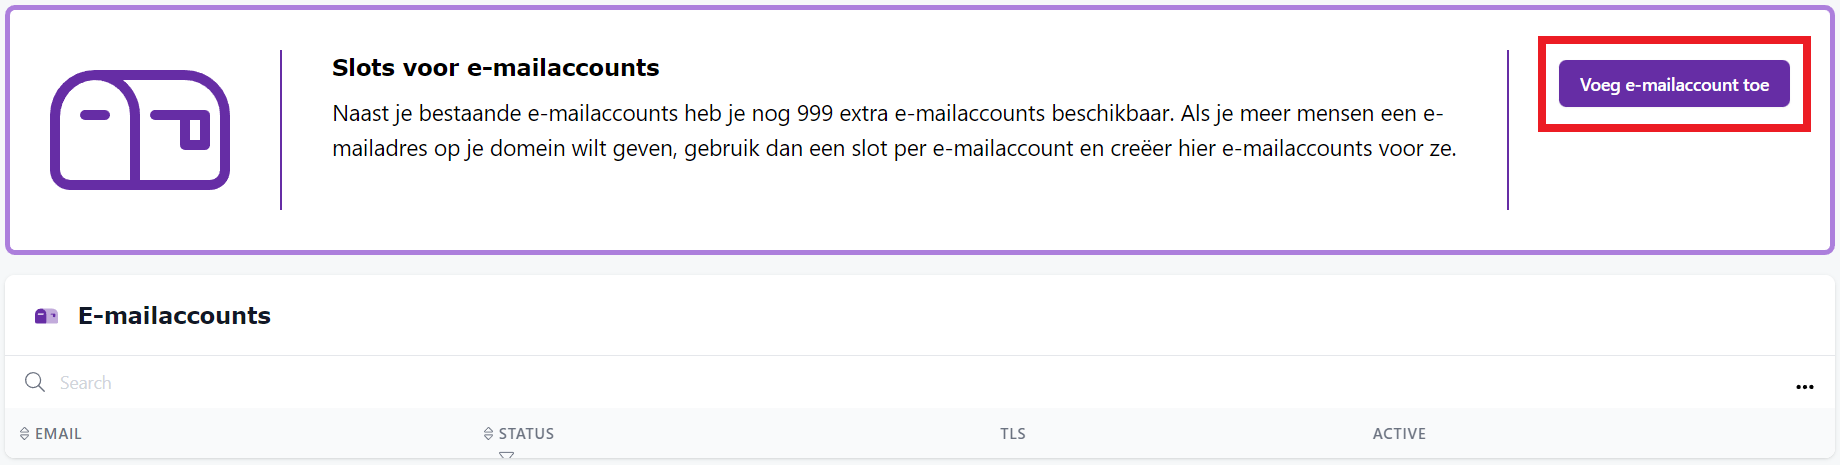 Voeg e-mailaccount toe.png